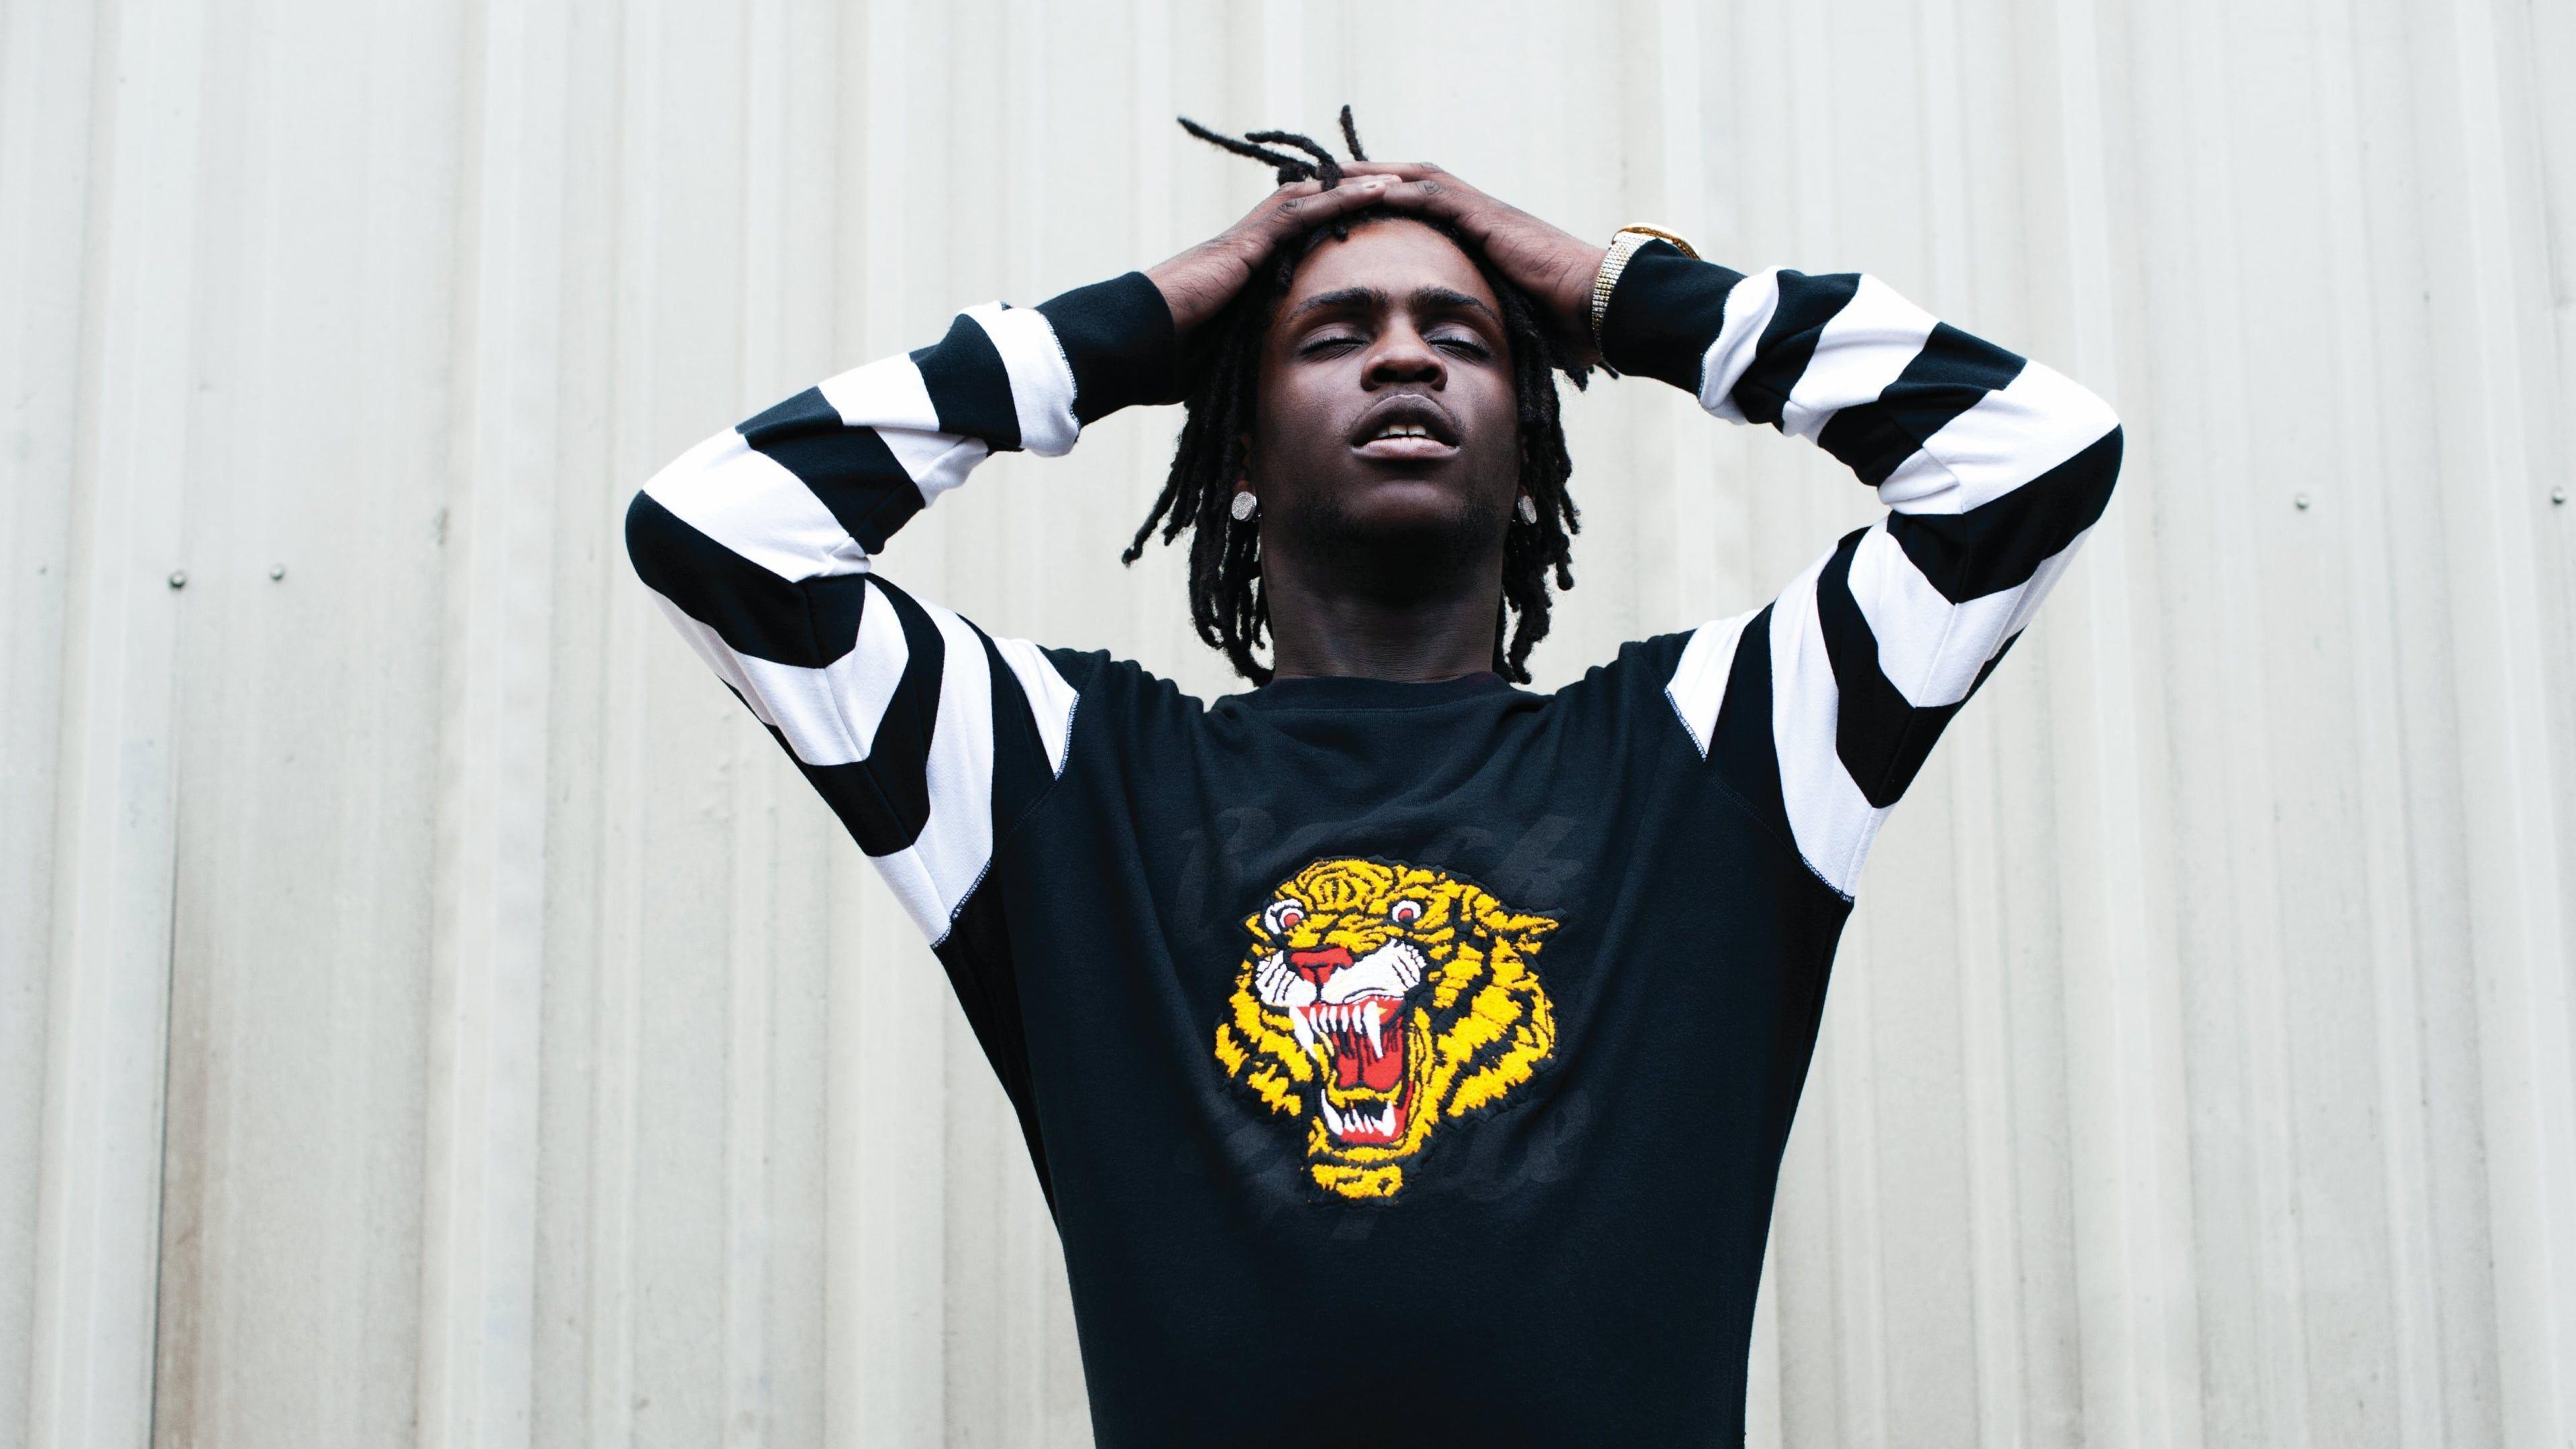 Chief Keef  Chief keef wallpaper Chief keef Black wallpapers tumblr